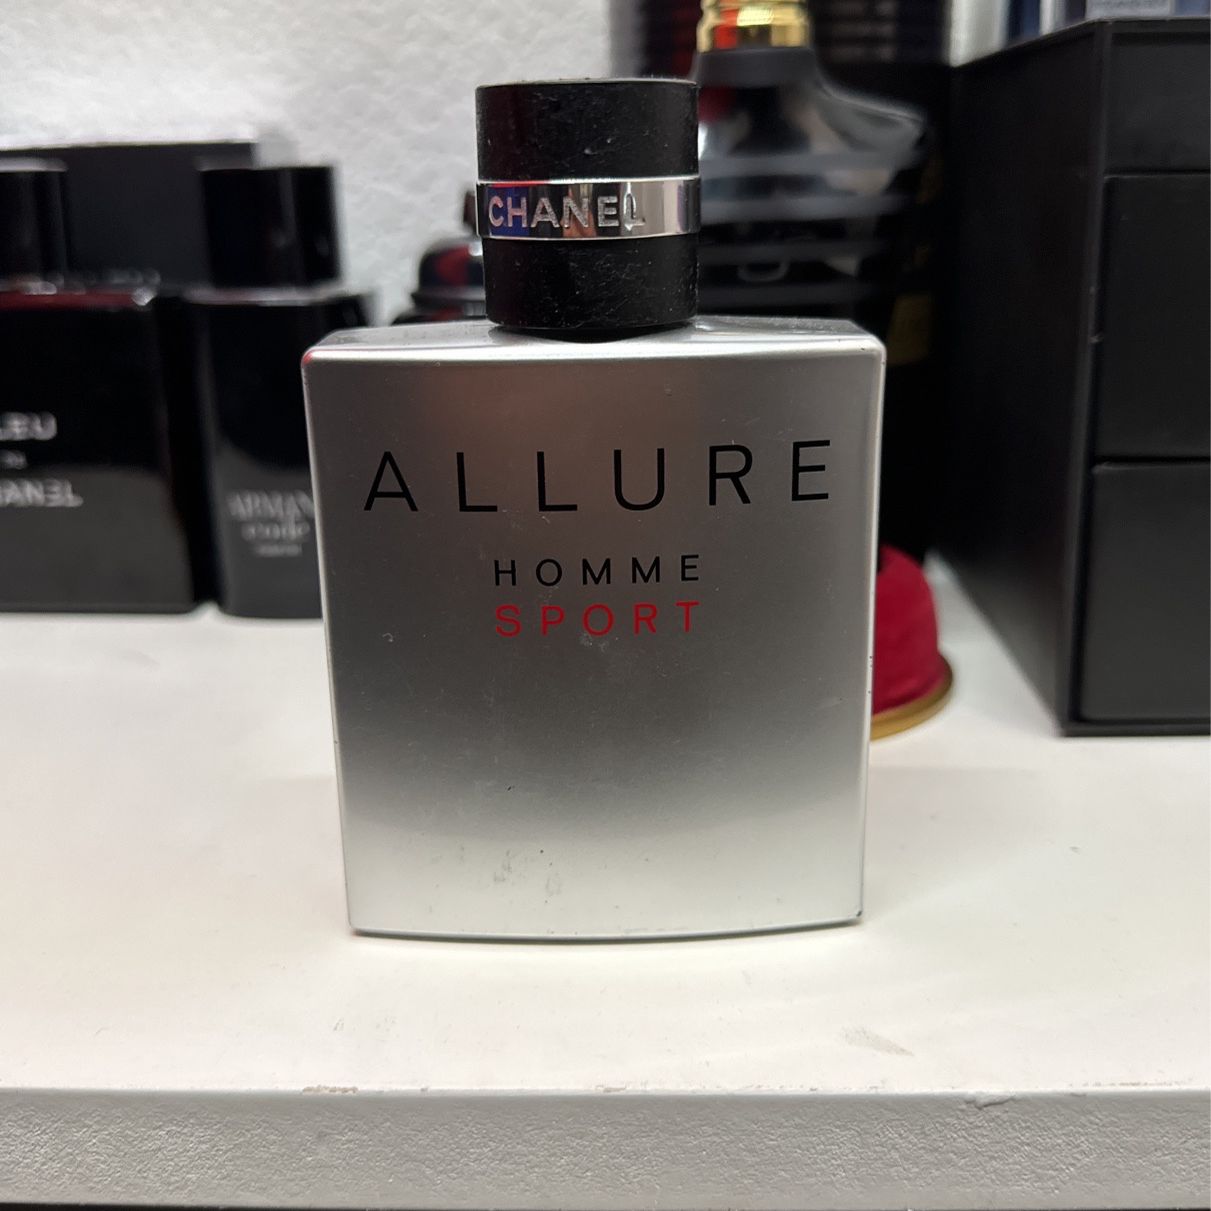 Chanel Allure Homme Sport Eau Extreme 3.4 Oz for Sale in